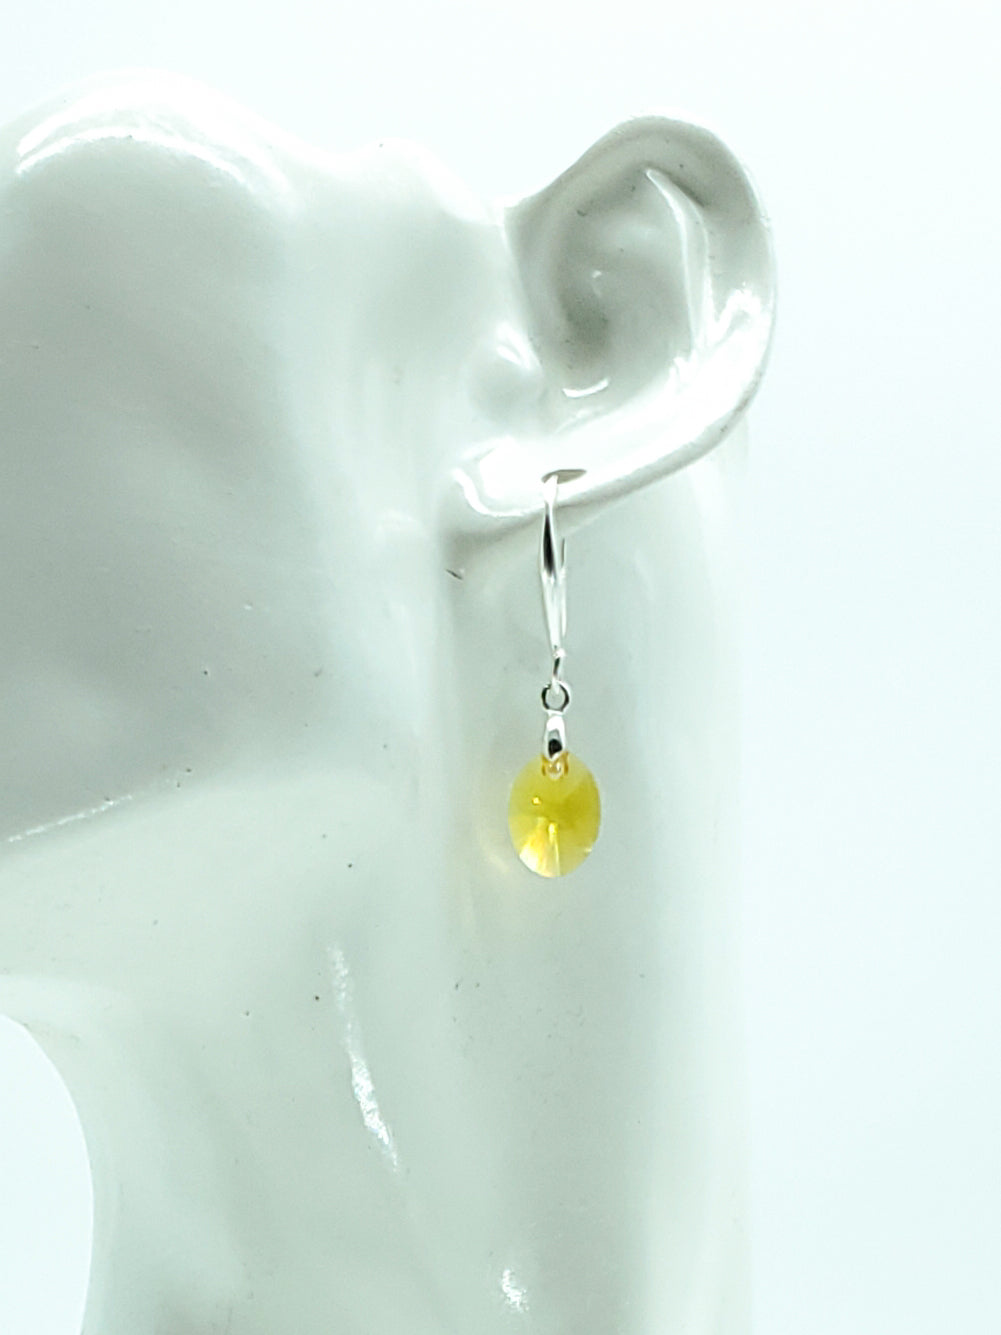 "Sunflower" OVAL SWAROVSKI CRYSTAL/STERLING SILVER EARRINGS - The Caffeinated Raven